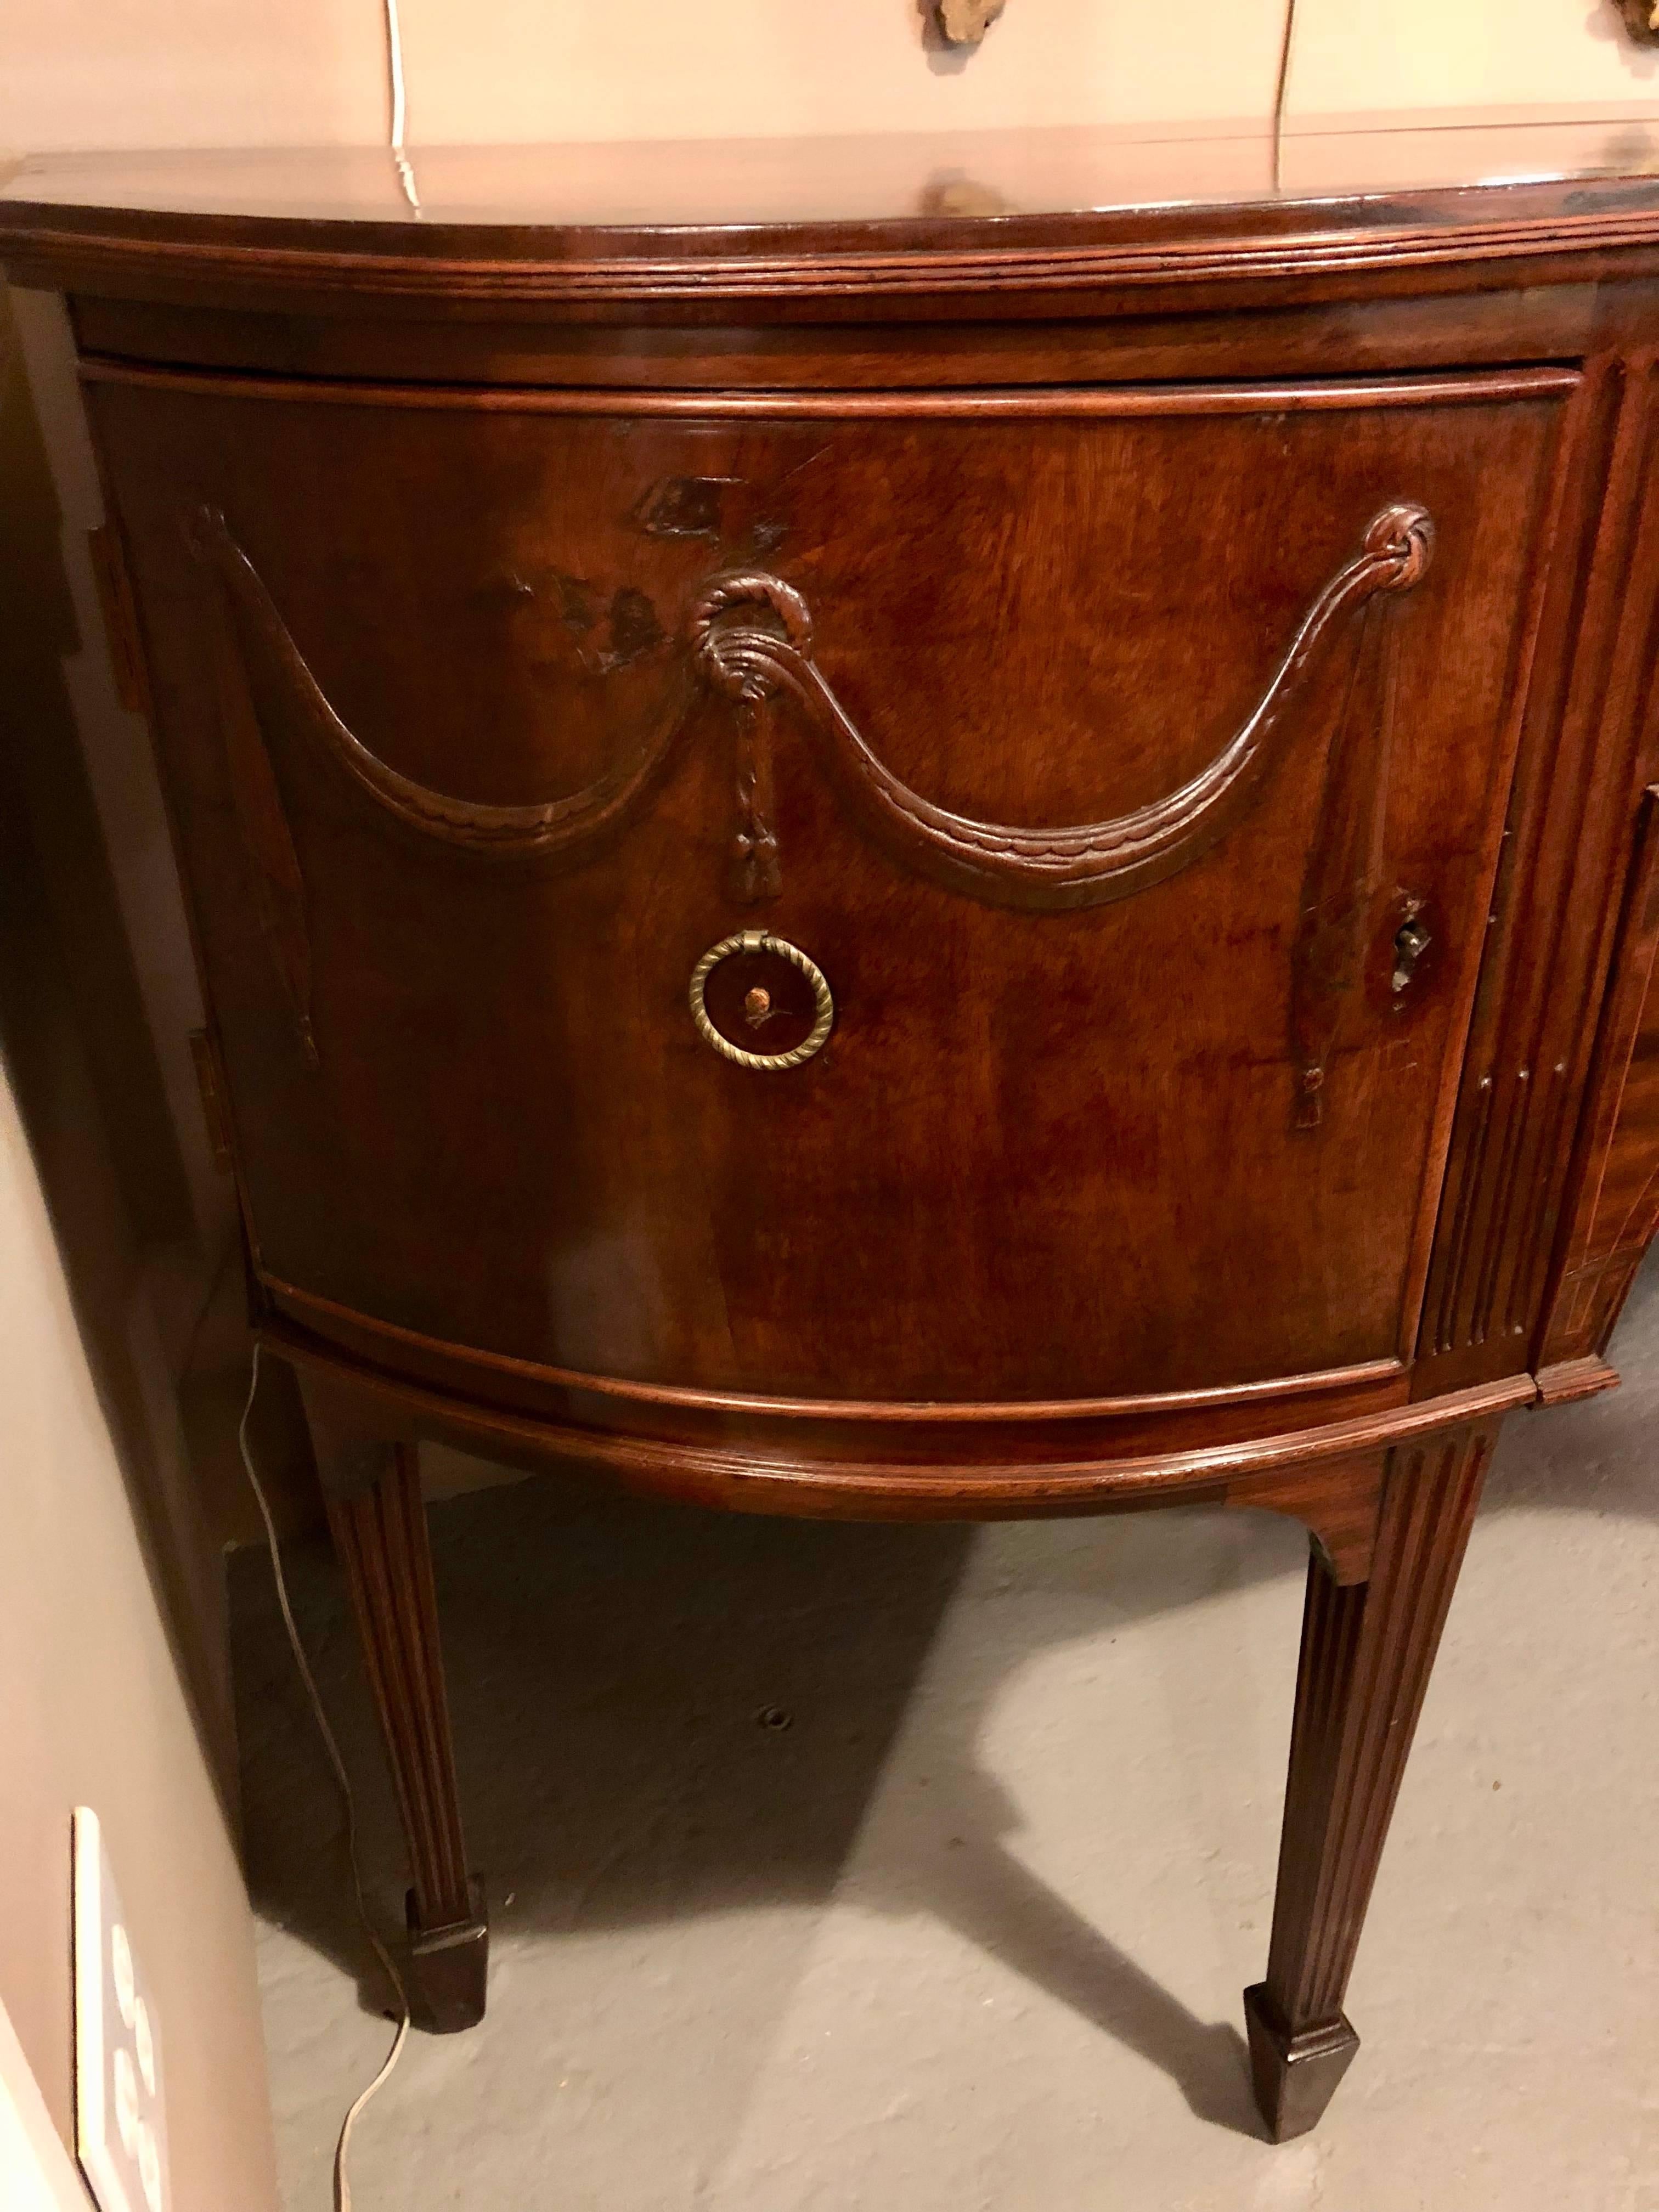 A Georgian period demilune sideboard or serving table breakfront. This 18th-early 19th century sideboard has fine proportions as well as fine intricate carvings. The spade feet leading to tapering legs supporting an upper case of two center drawers,